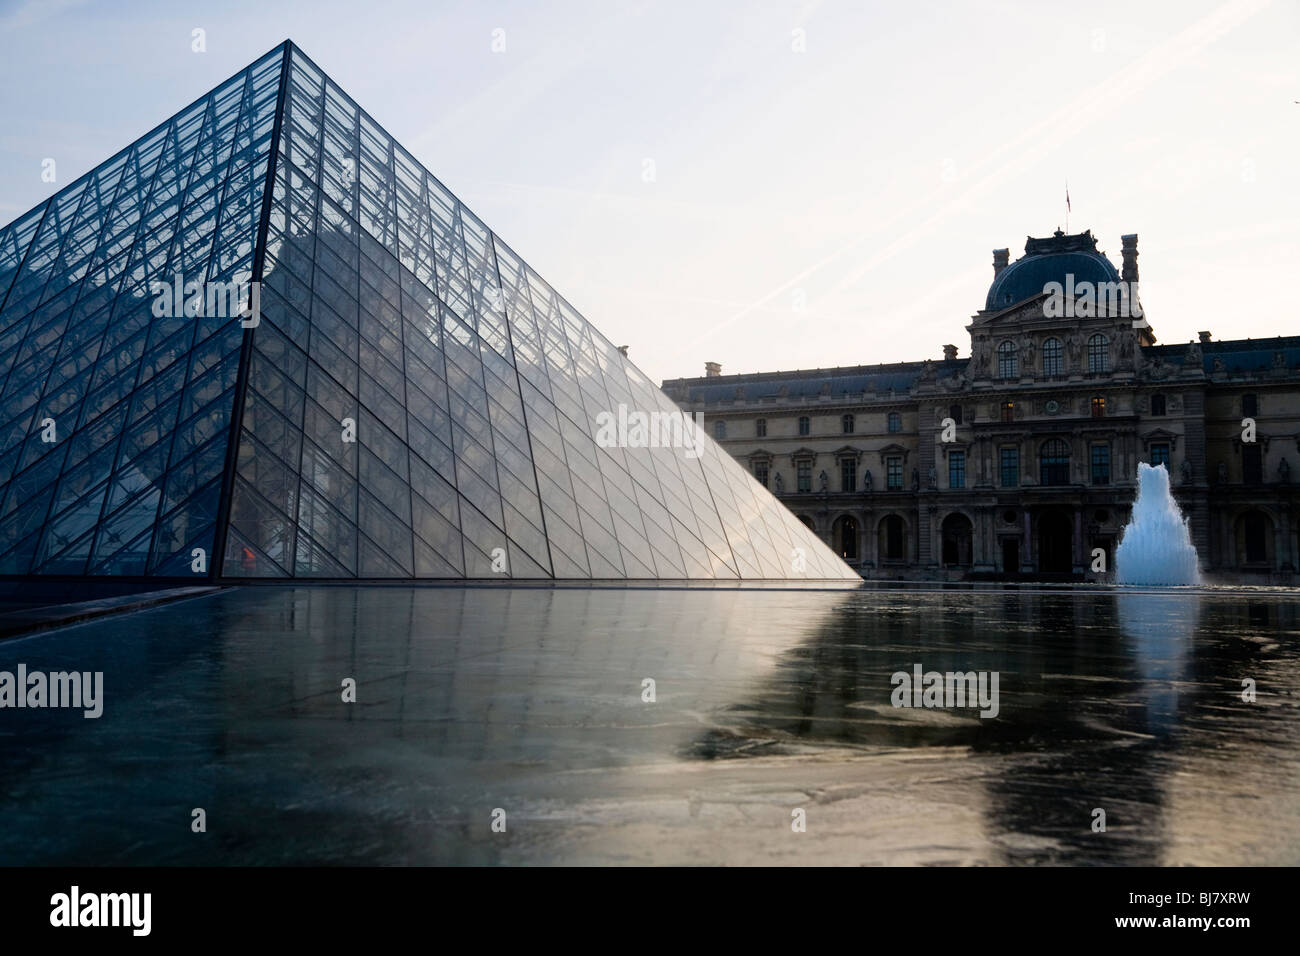 Dawn and winter sunrise over frozen pond near the Glass Pyramid of The Louvre Museum / Musee / Palais du Louvre. Paris, France. Stock Photo